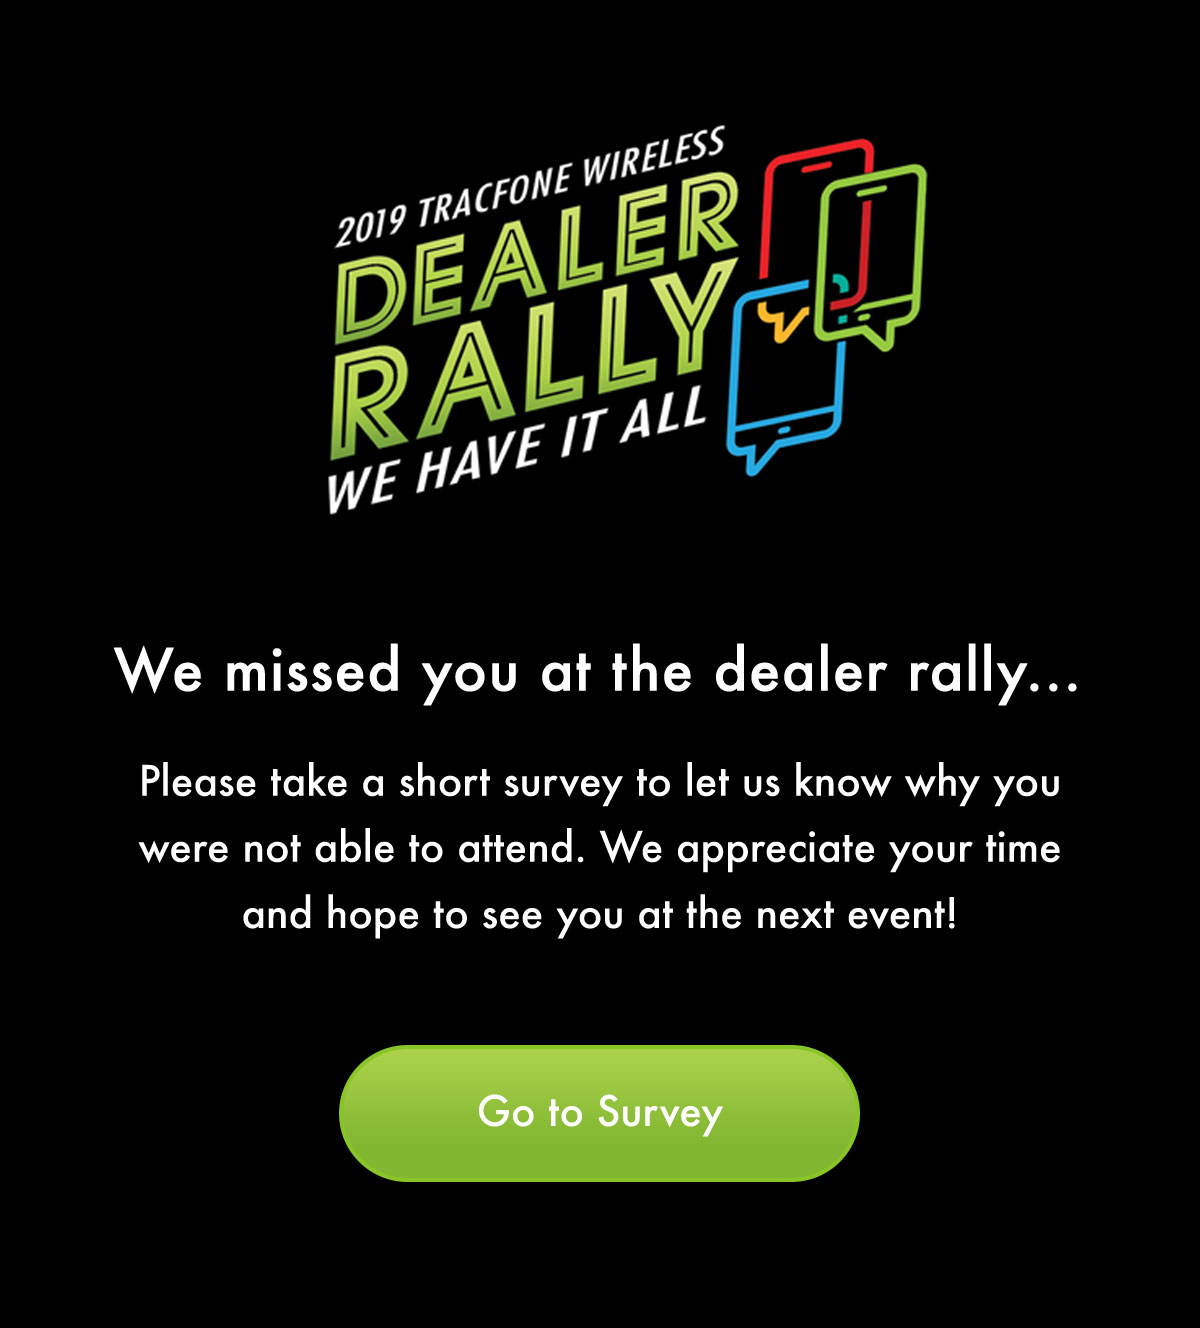 We're sorry we missed you, please take a moment to let us know why you weren't able to attend the Dealer Rally.